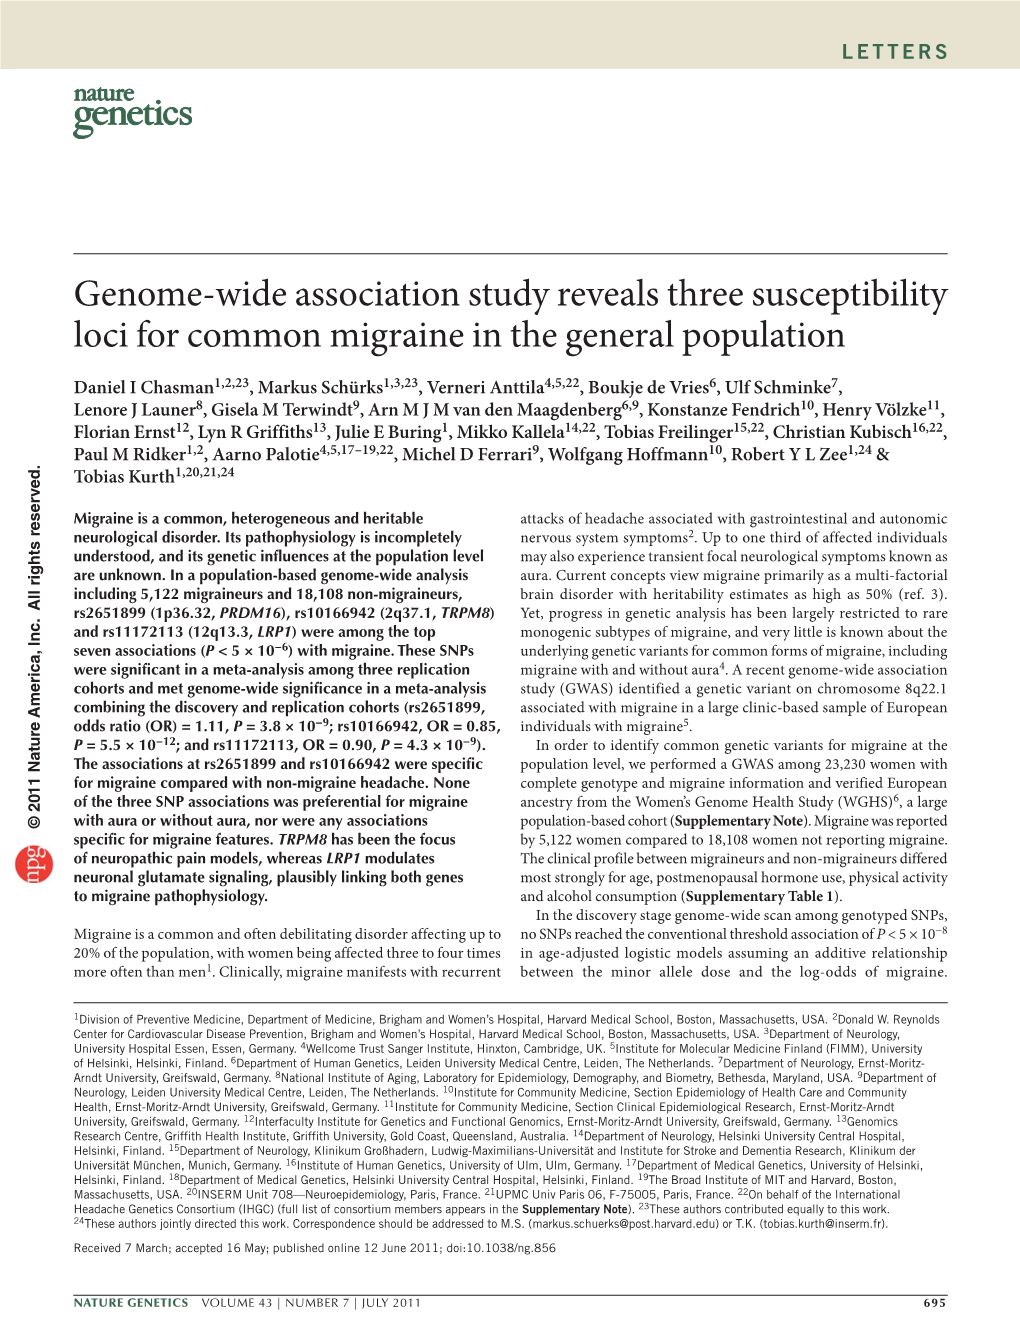 Genome-Wide Association Study Reveals Three Susceptibility Loci For